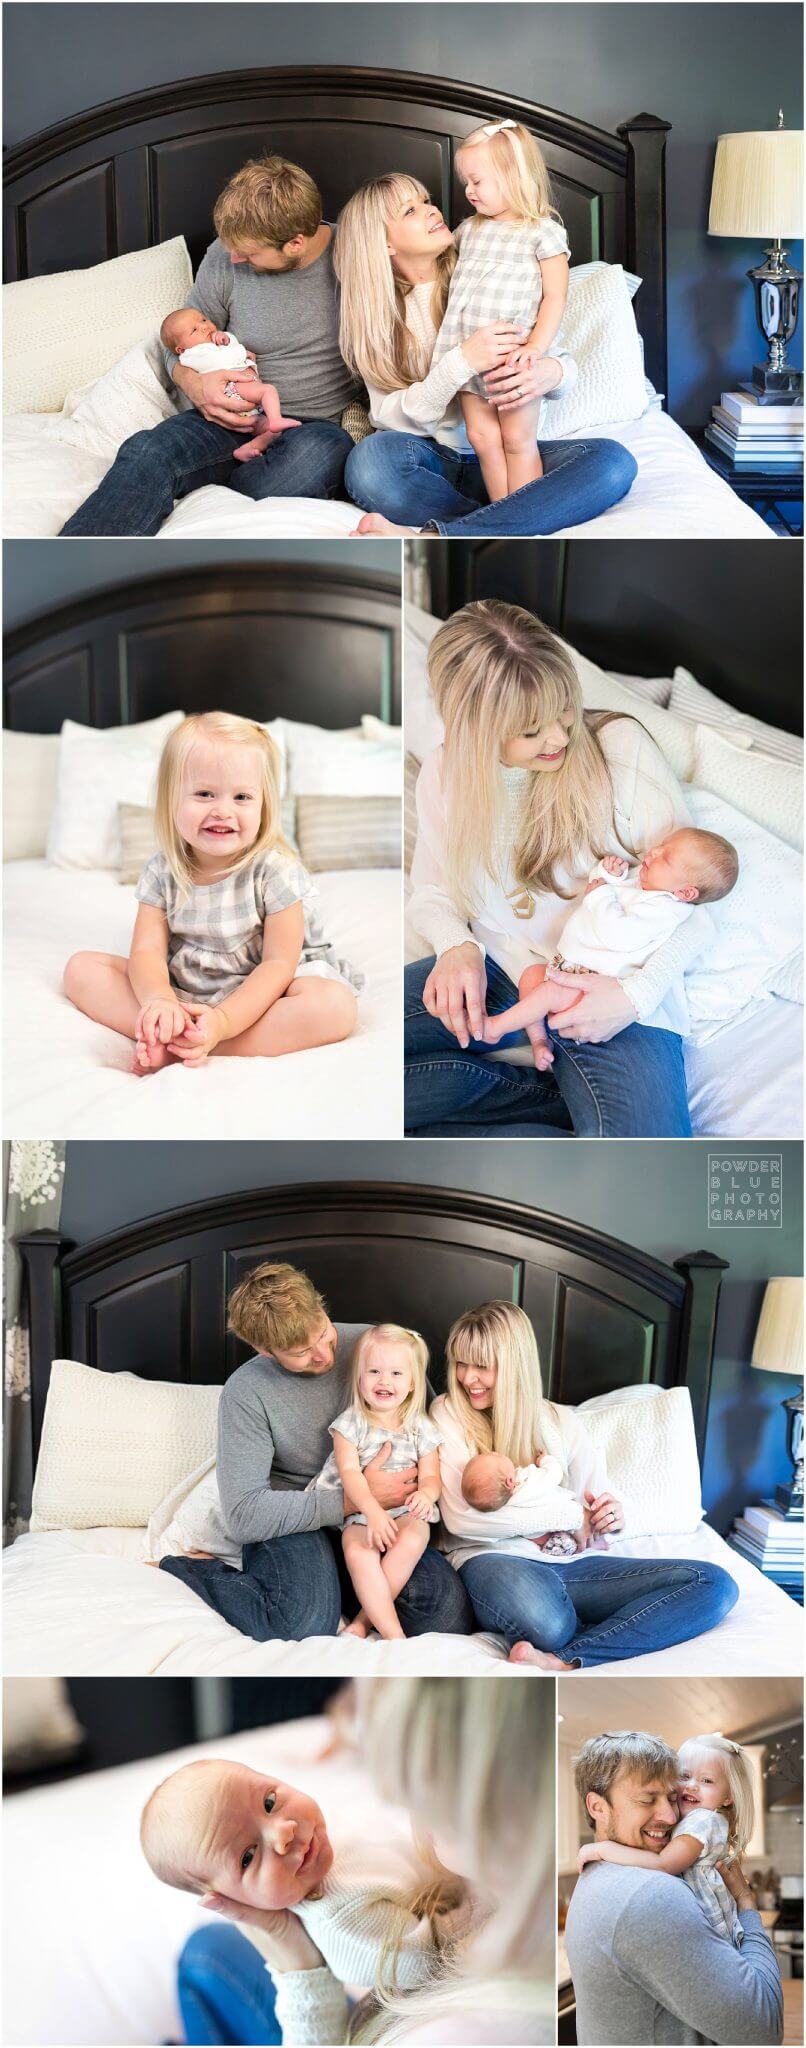 pittsburgh newborn photographer family session in home. baby girl in black wrap with floral print. Canon 600 ex-rt.